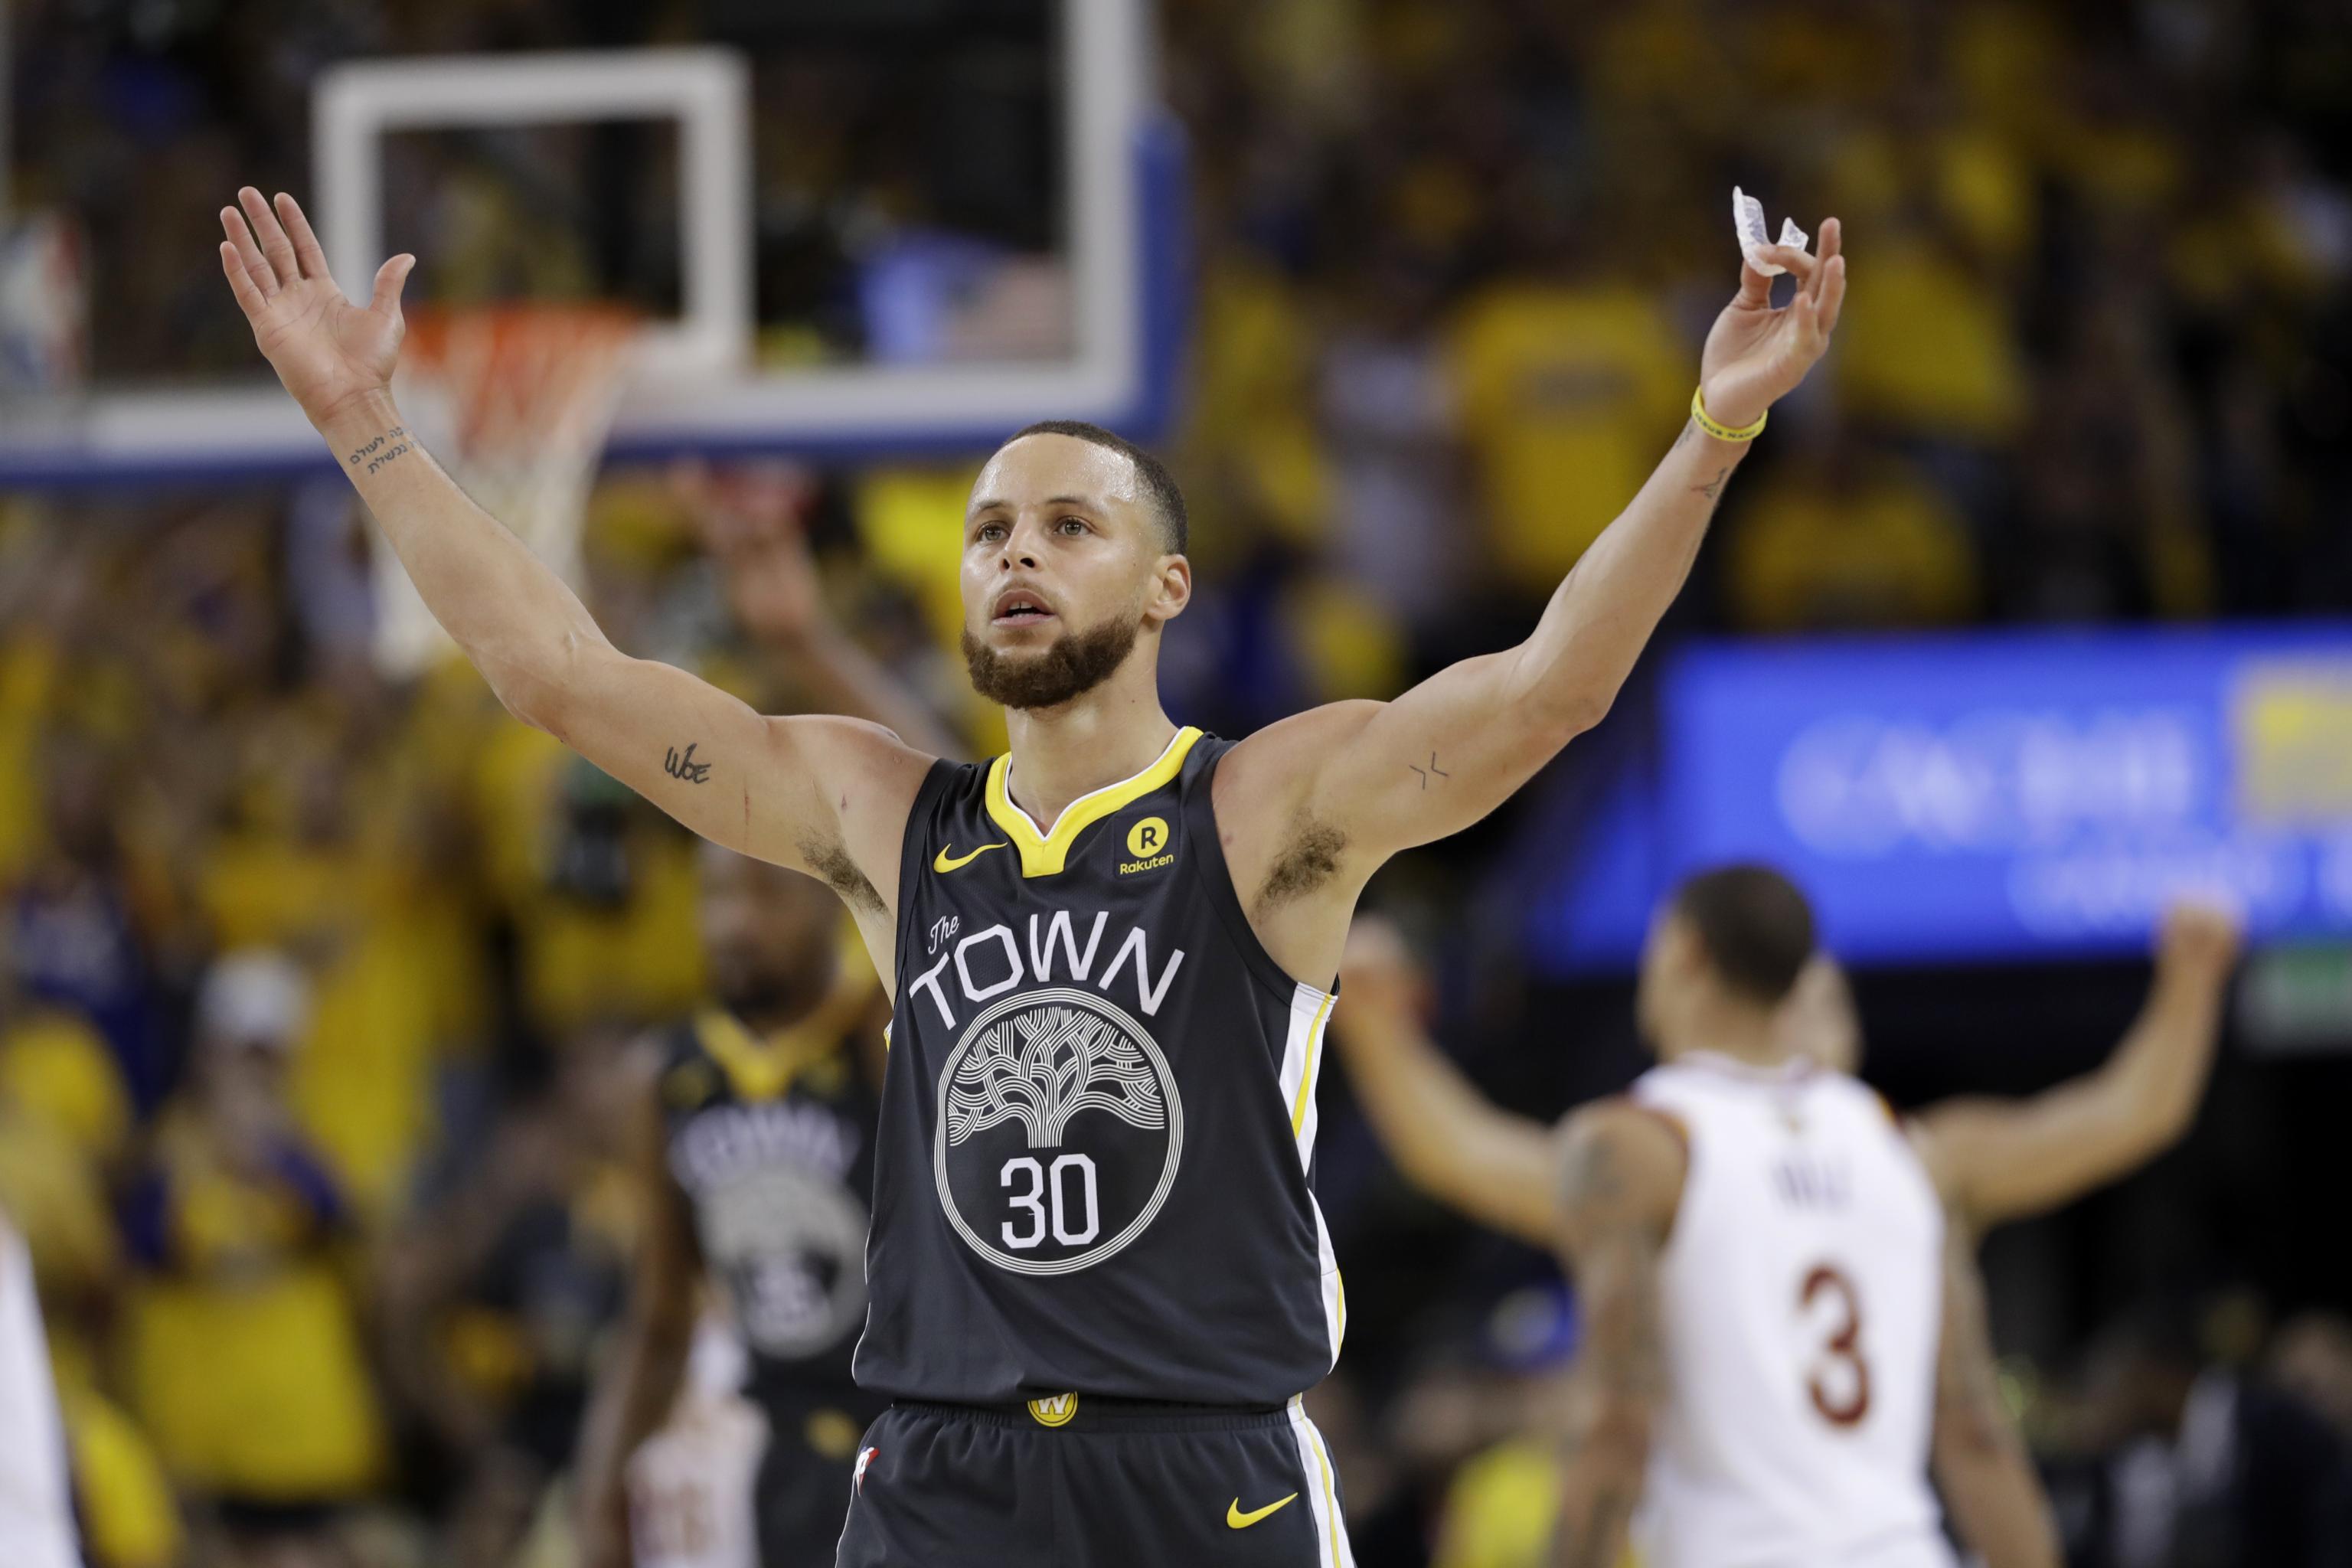 Stephen Curry will end his career as the greatest Warrior of all-time